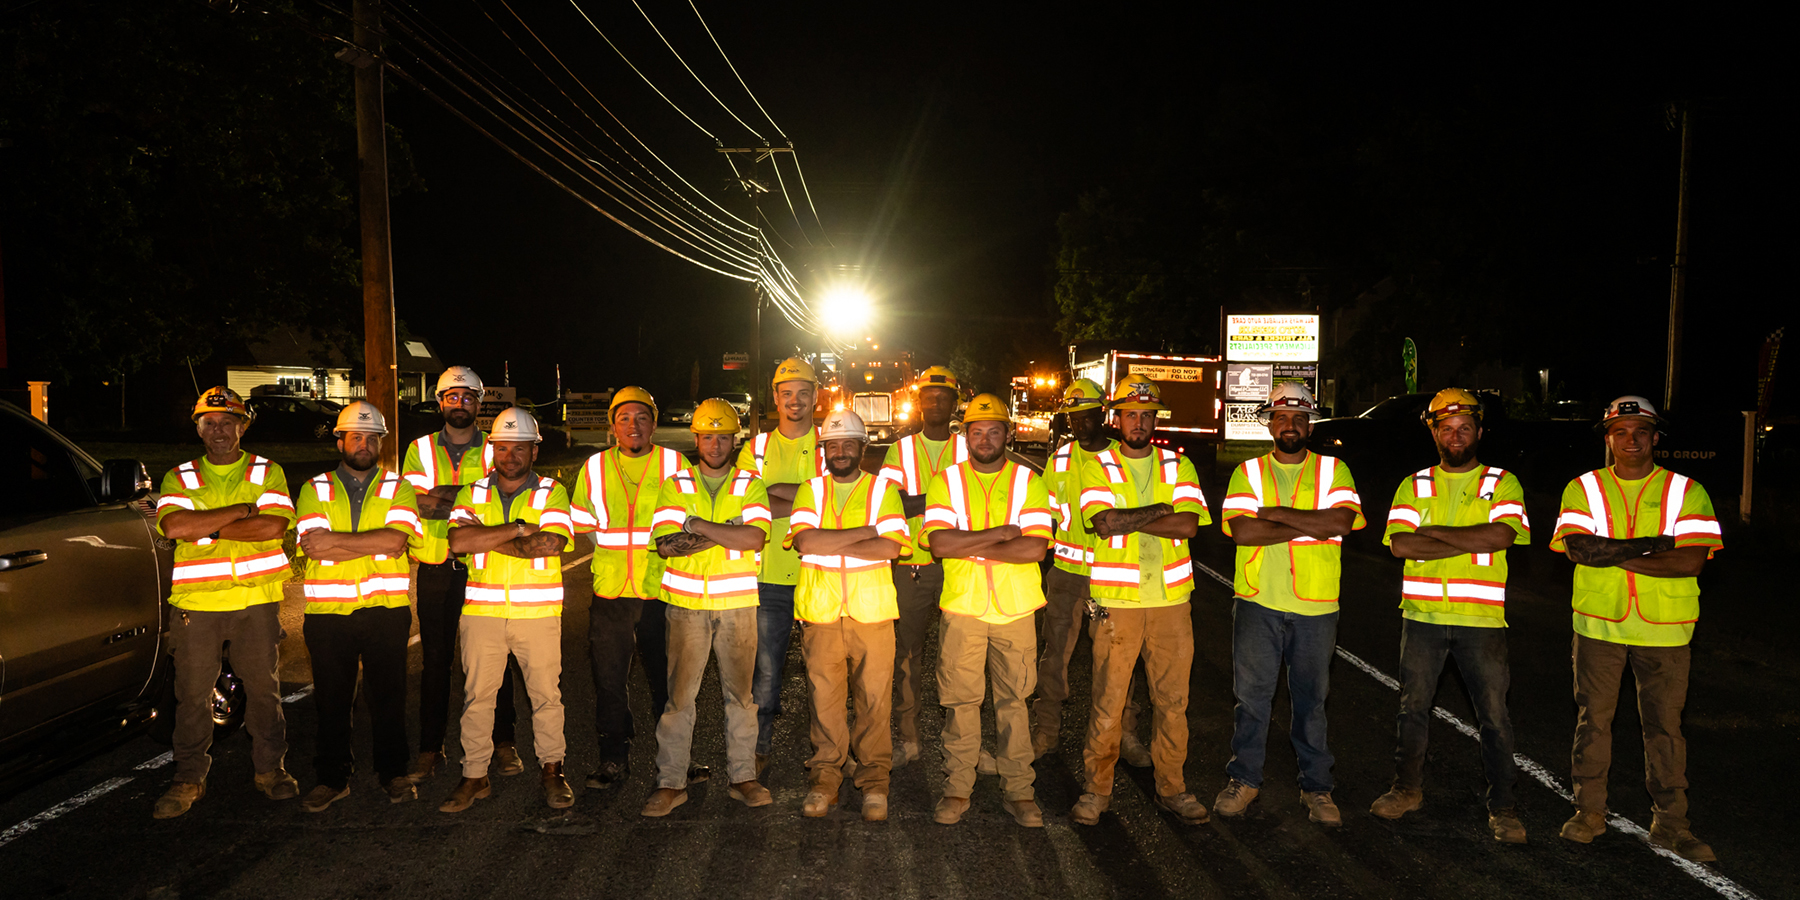 Earle employees in personal protective wear smile in New Jersey.